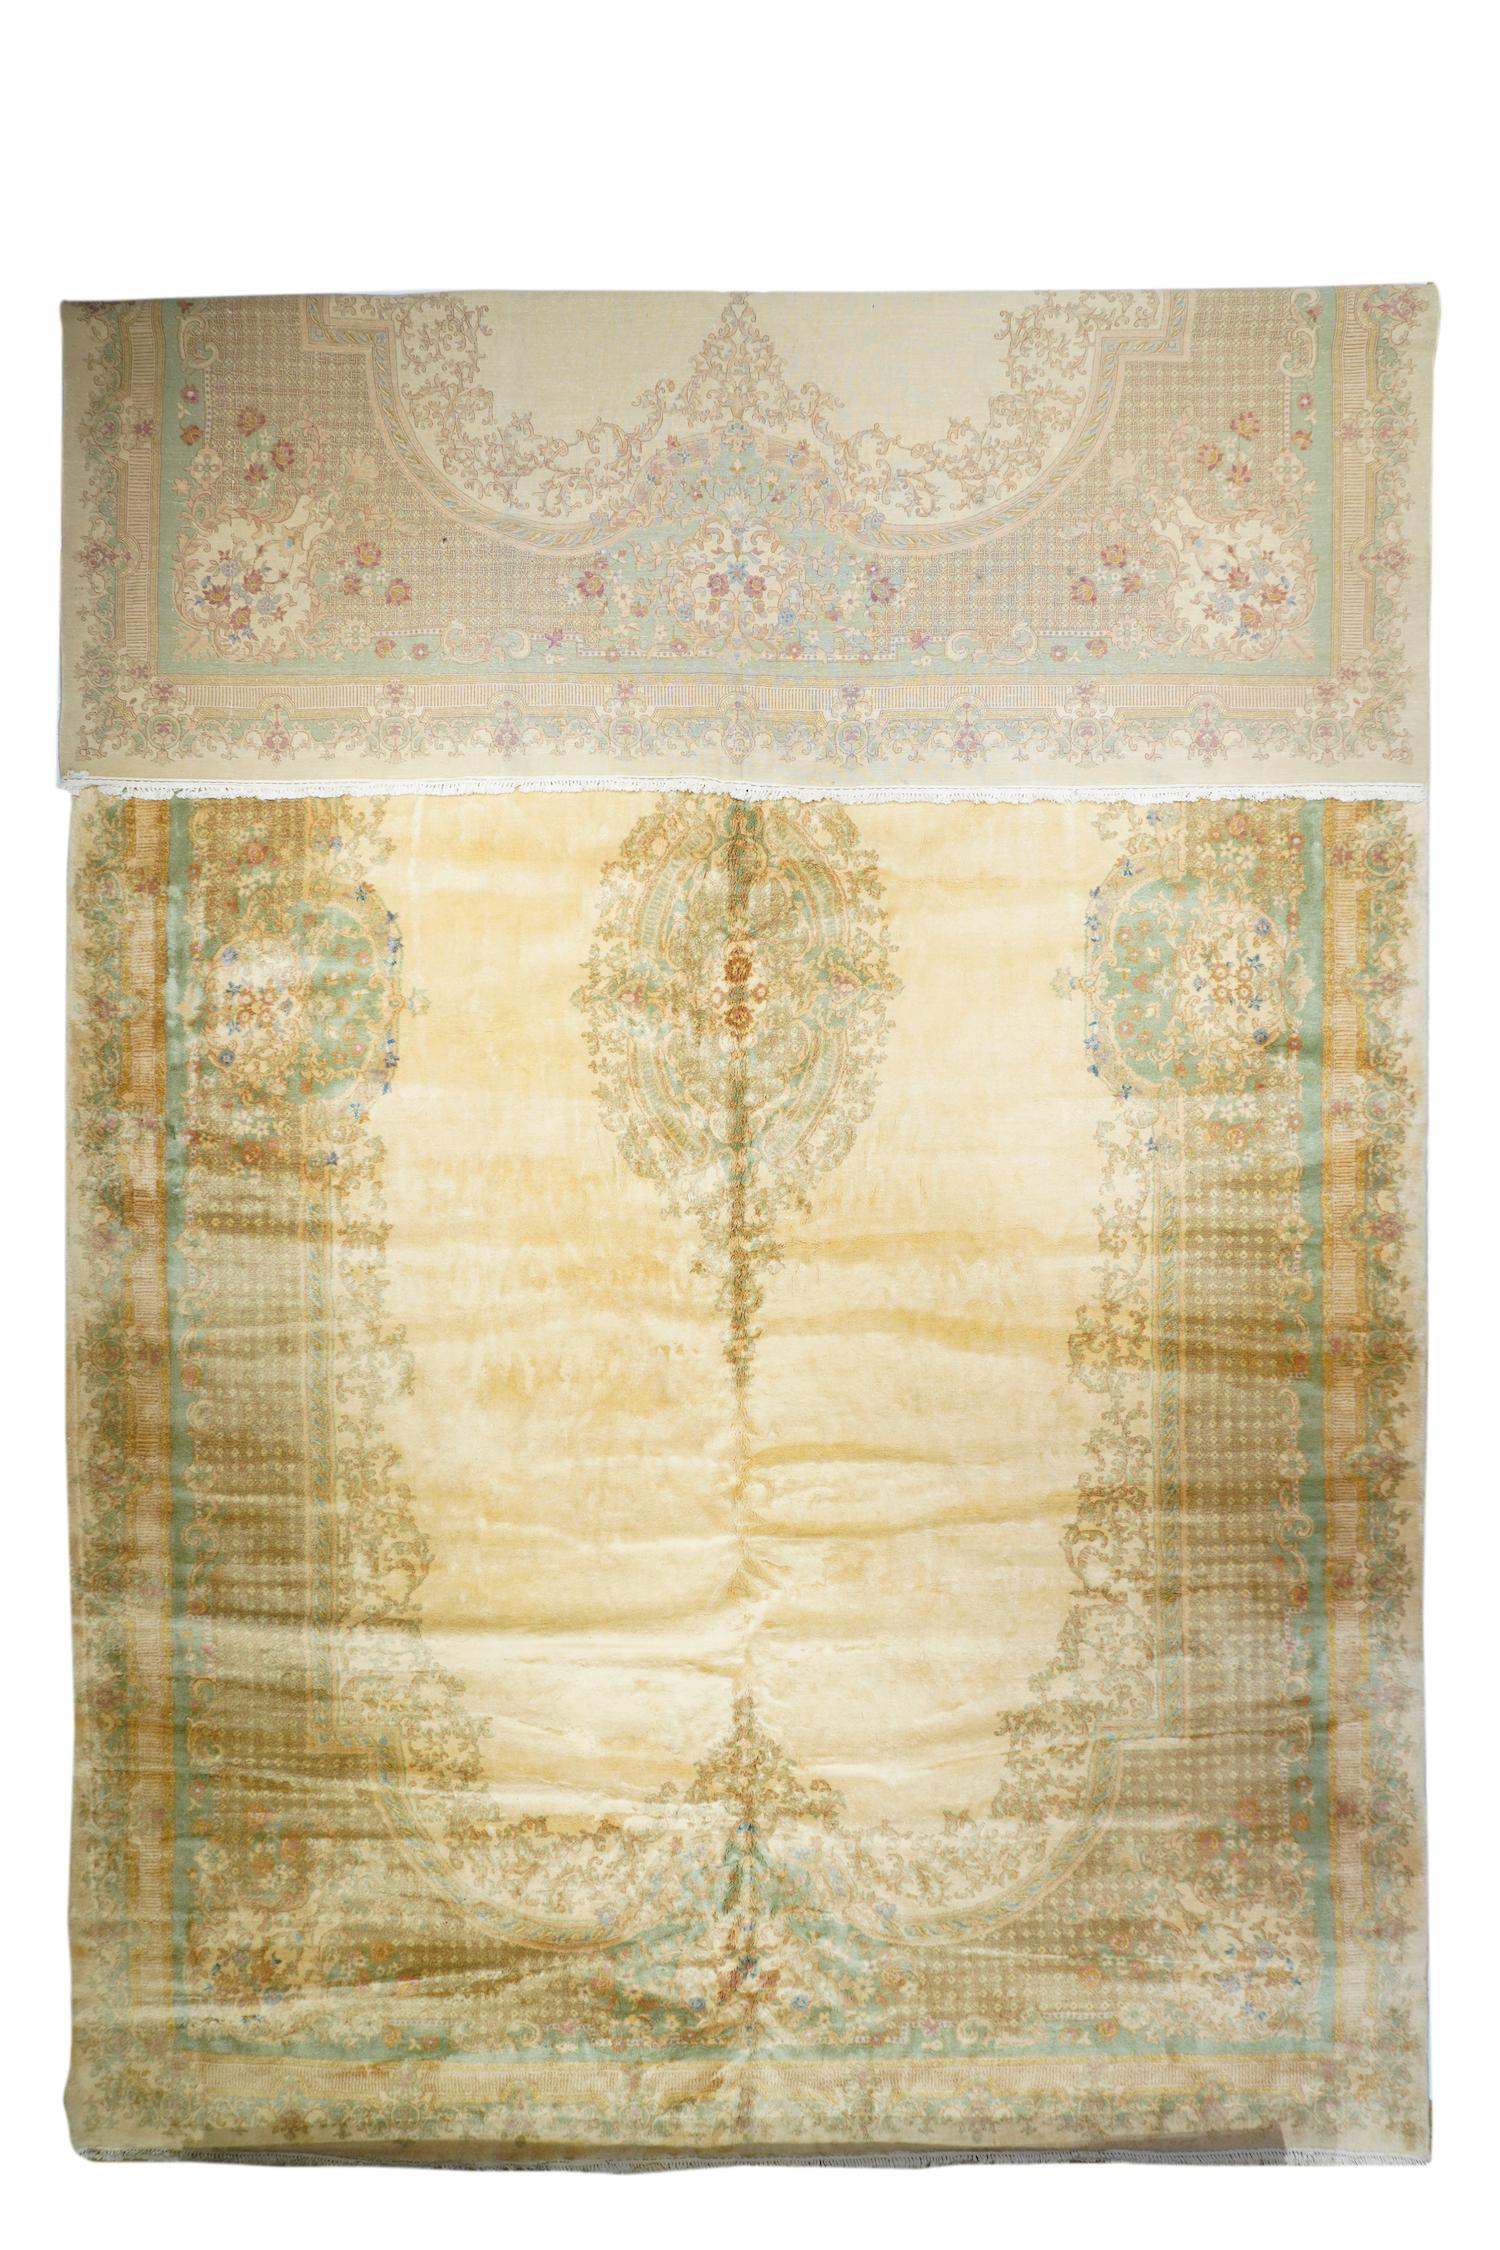 The post WWI French-American style SE Persian city carpet shows an open, cartouche shaped straw-sand sub- field with a filigree surround and en suite slender elliptical medallion. Lattice-work field with Louis-style corner, side and end elements.